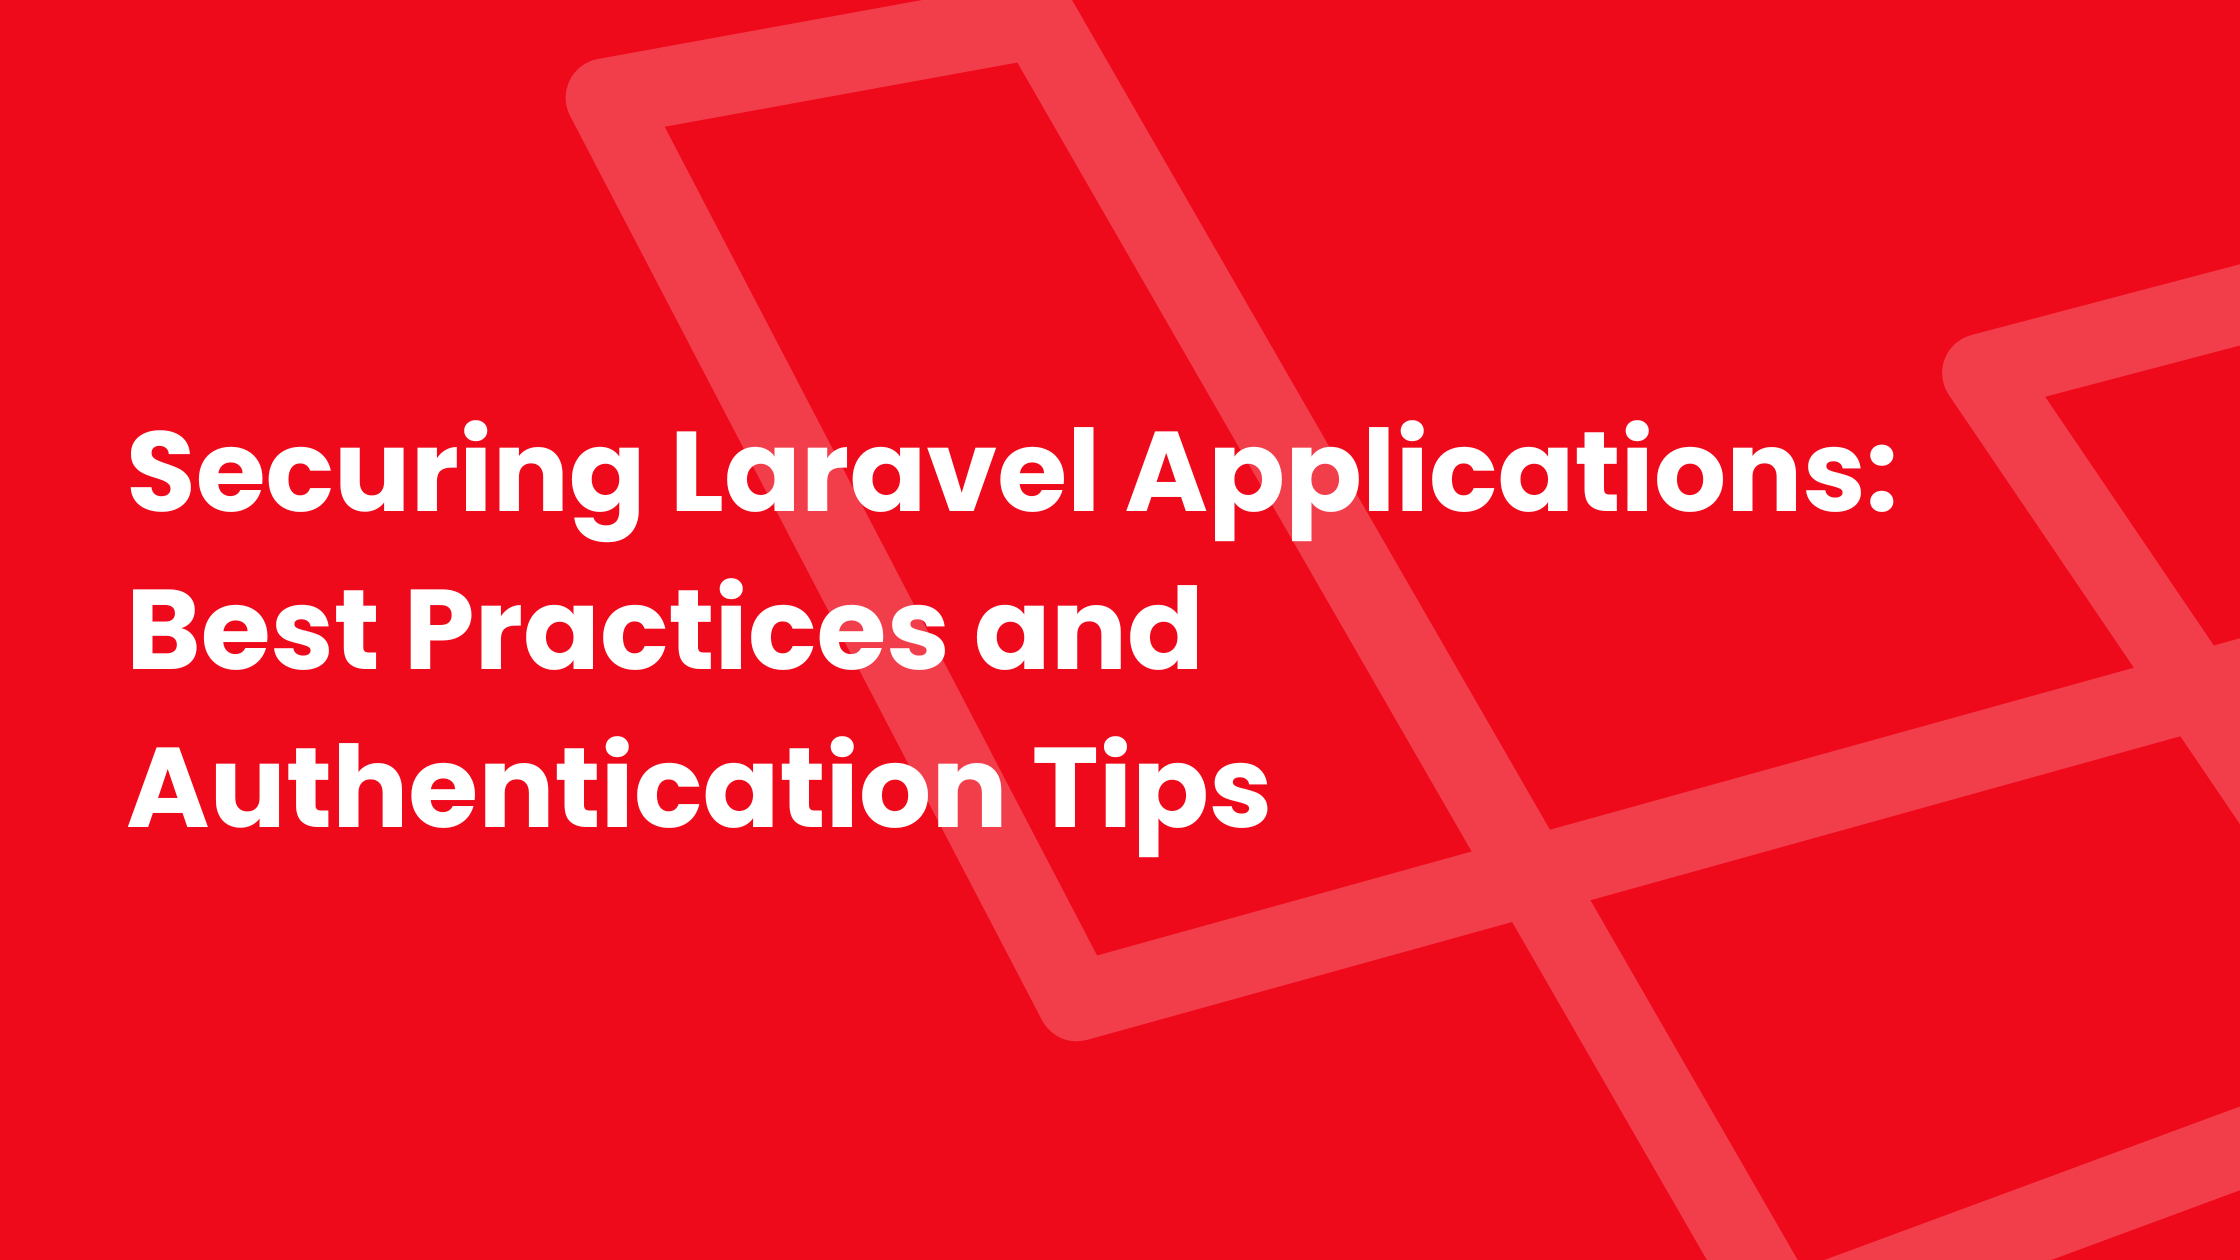 Securing Laravel Applications: Best Practices and Authentication Tips